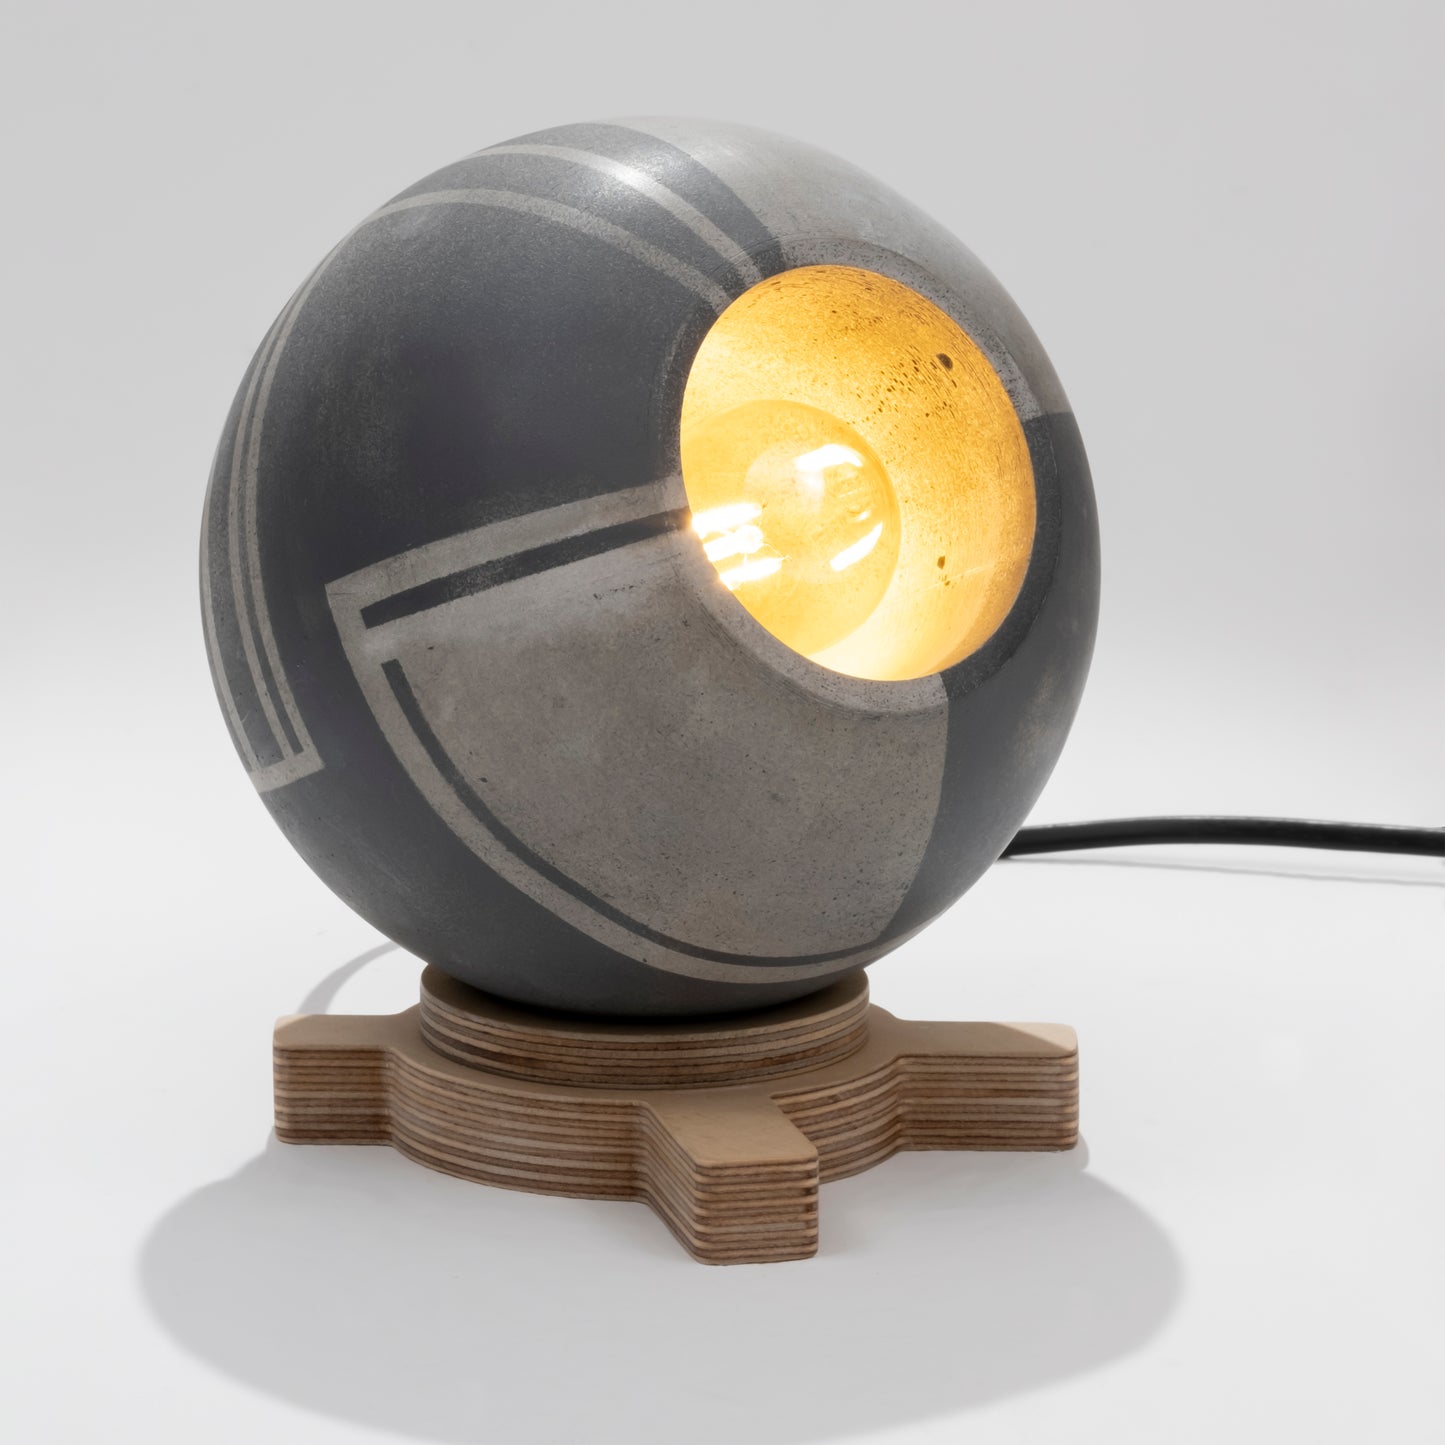 Anthracite Concrete Globe Table Lamp "Circuit", Modern Table Lamps